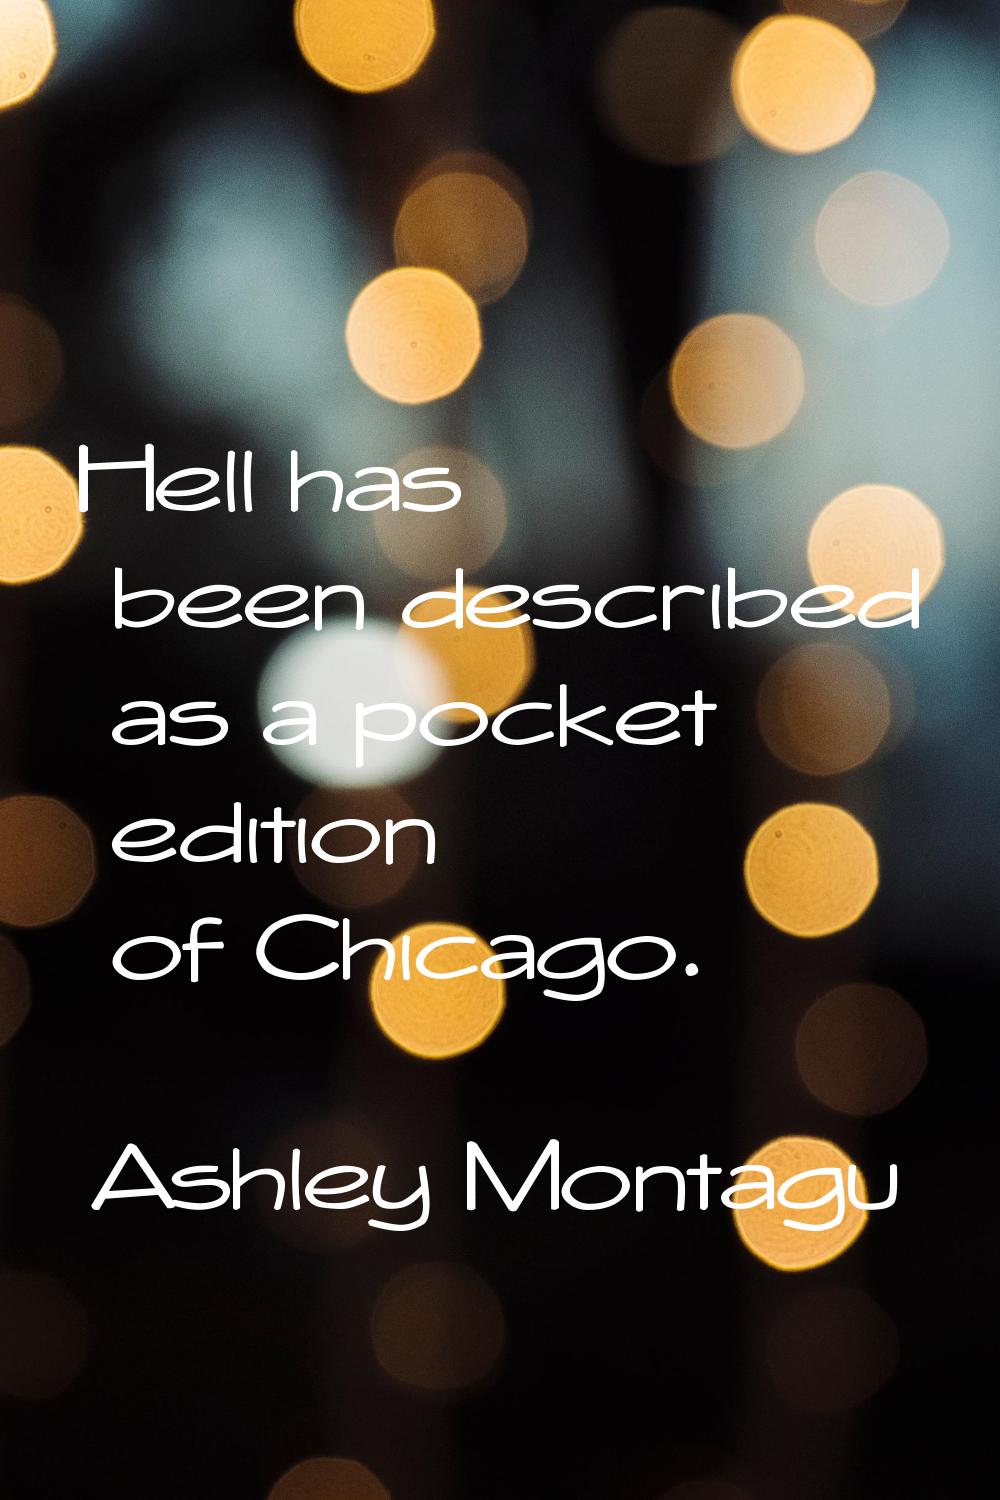 Hell has been described as a pocket edition of Chicago.